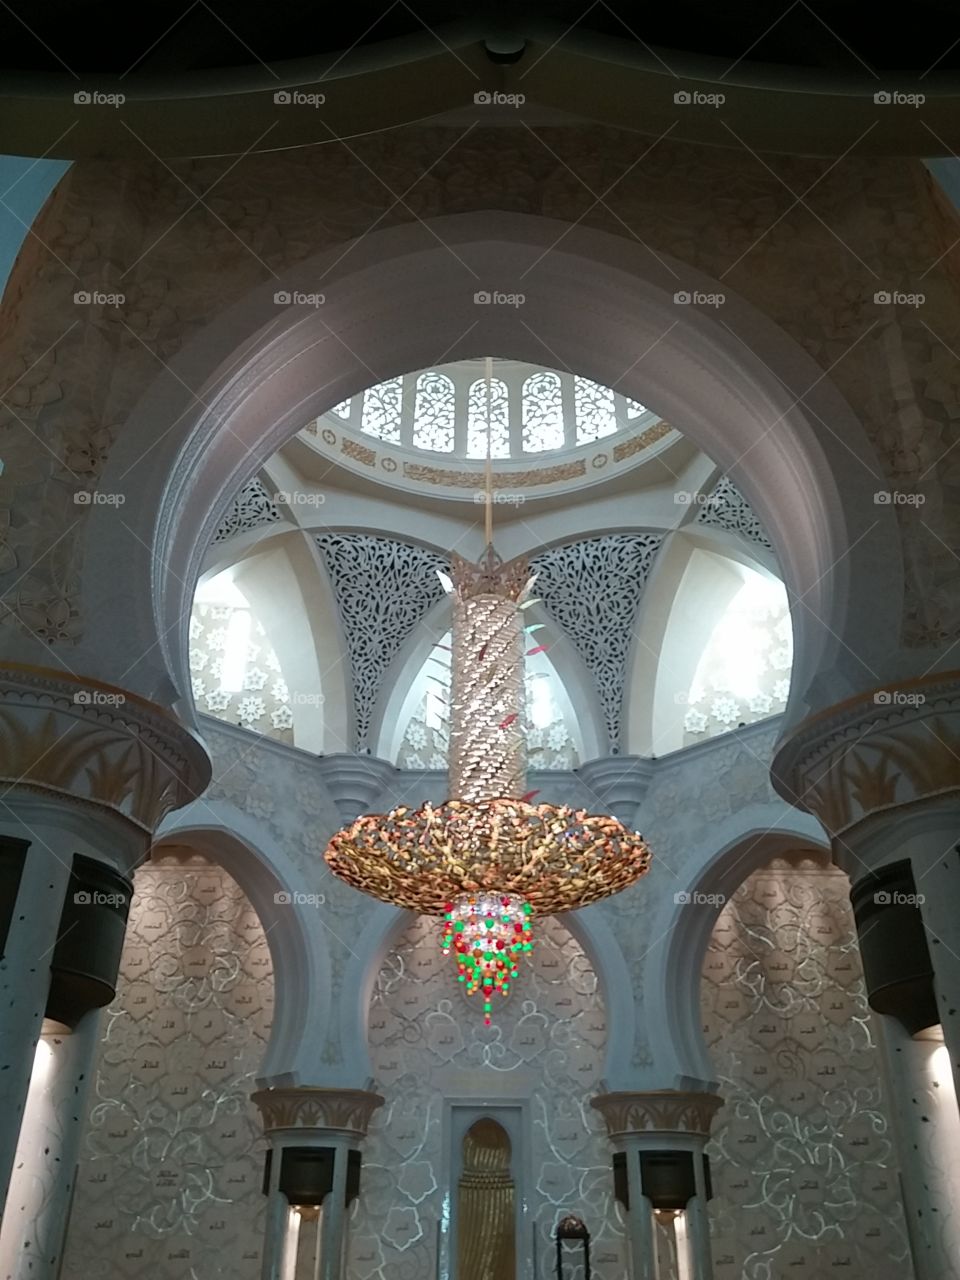 chandelier of the grand mosque. grand mosque in abu dhabi